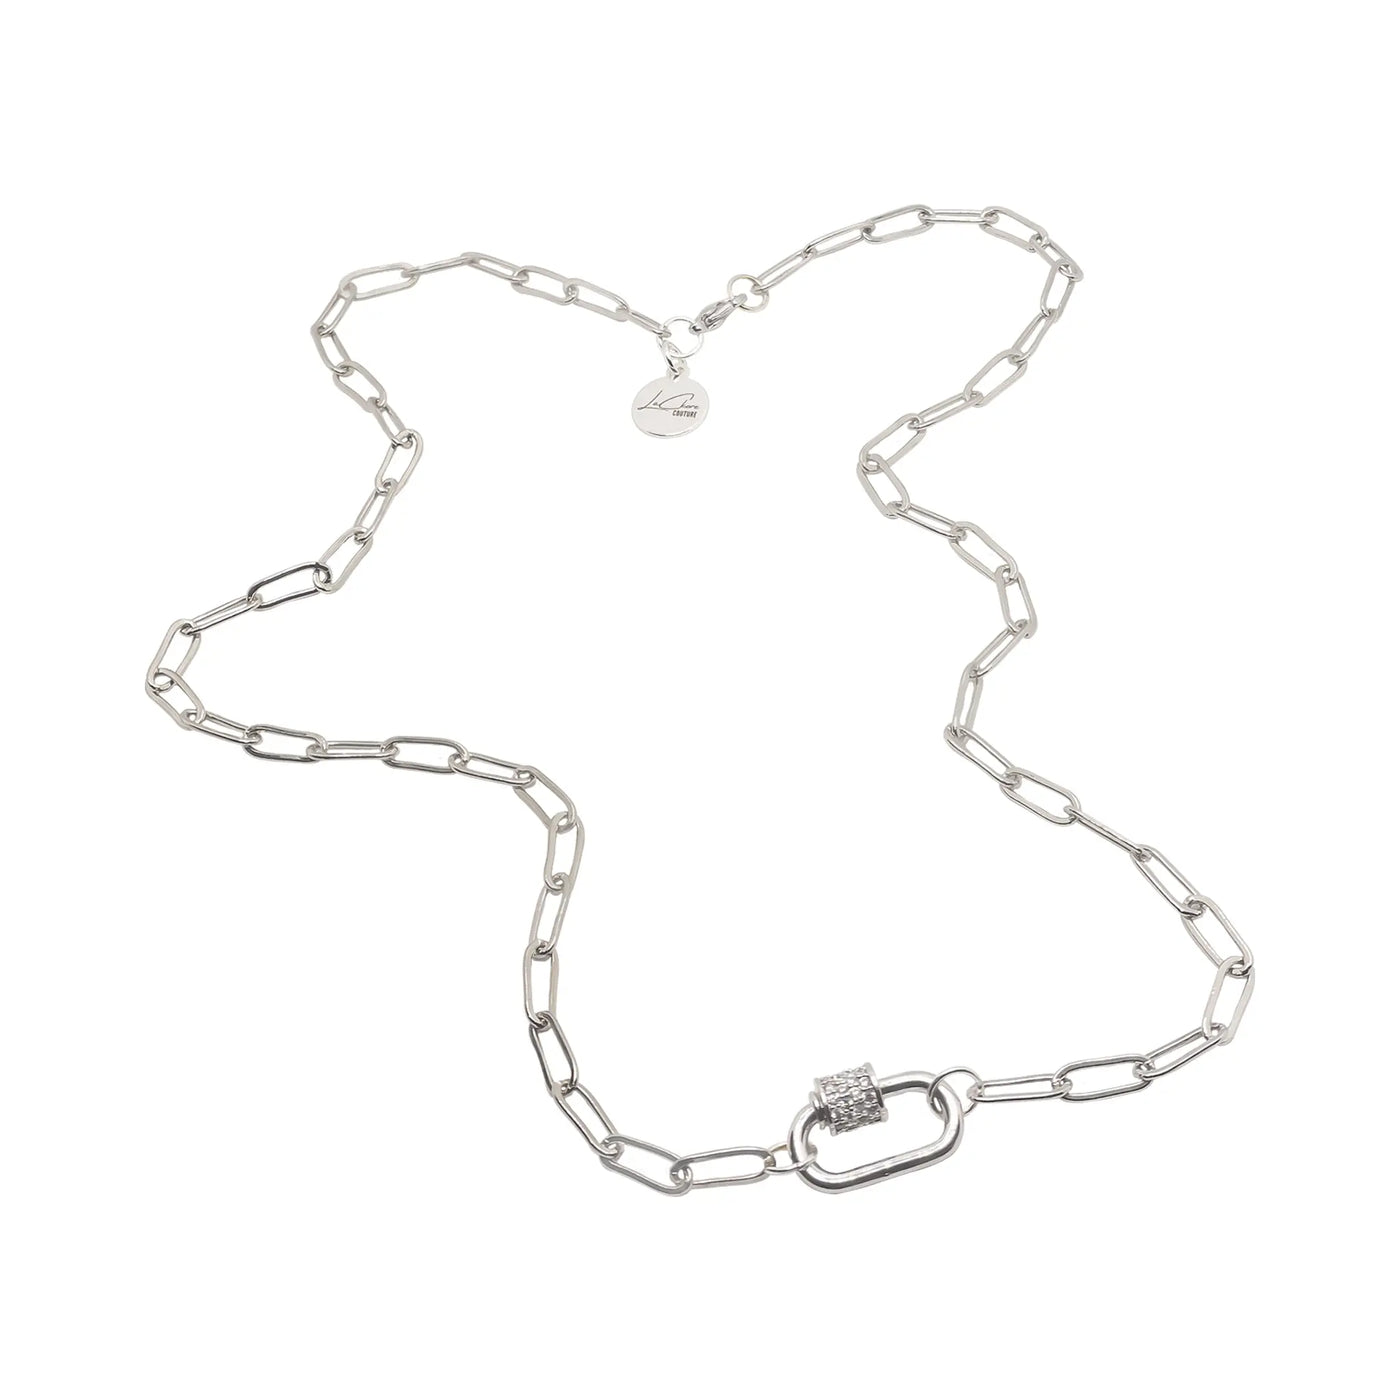 Crystal Link Lock Charm Necklace LaCkore Couture